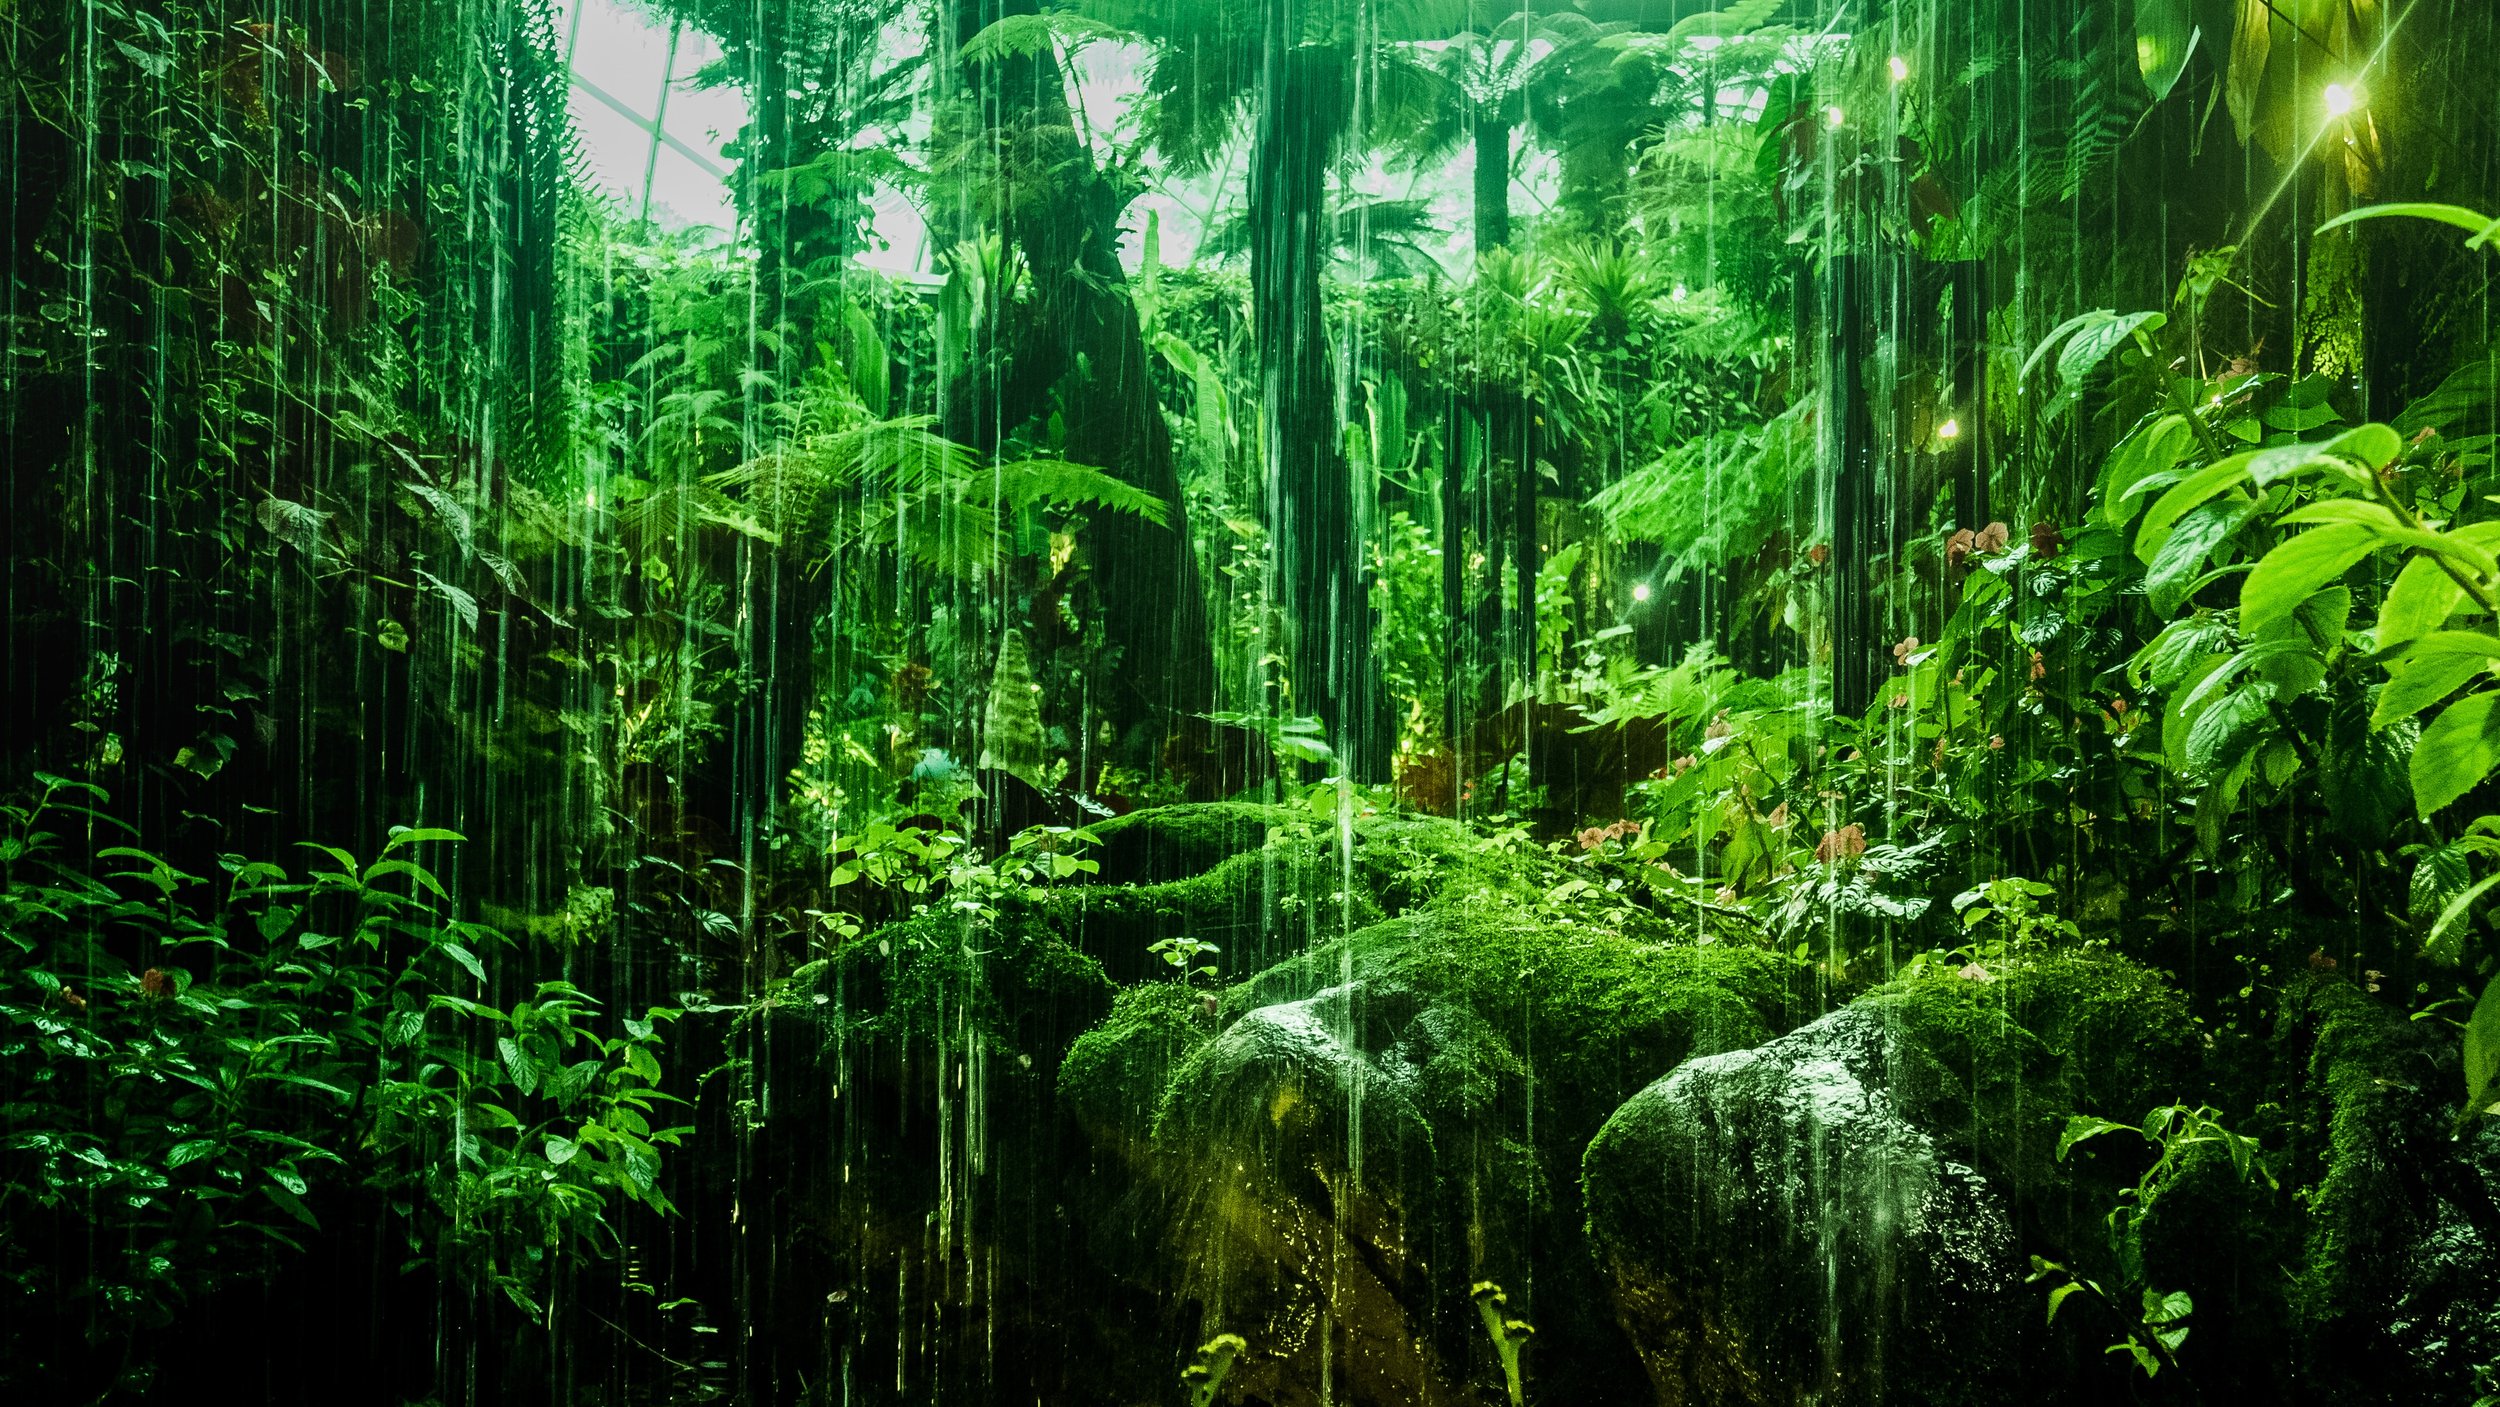 Most raindrops in tropical forests contain spores